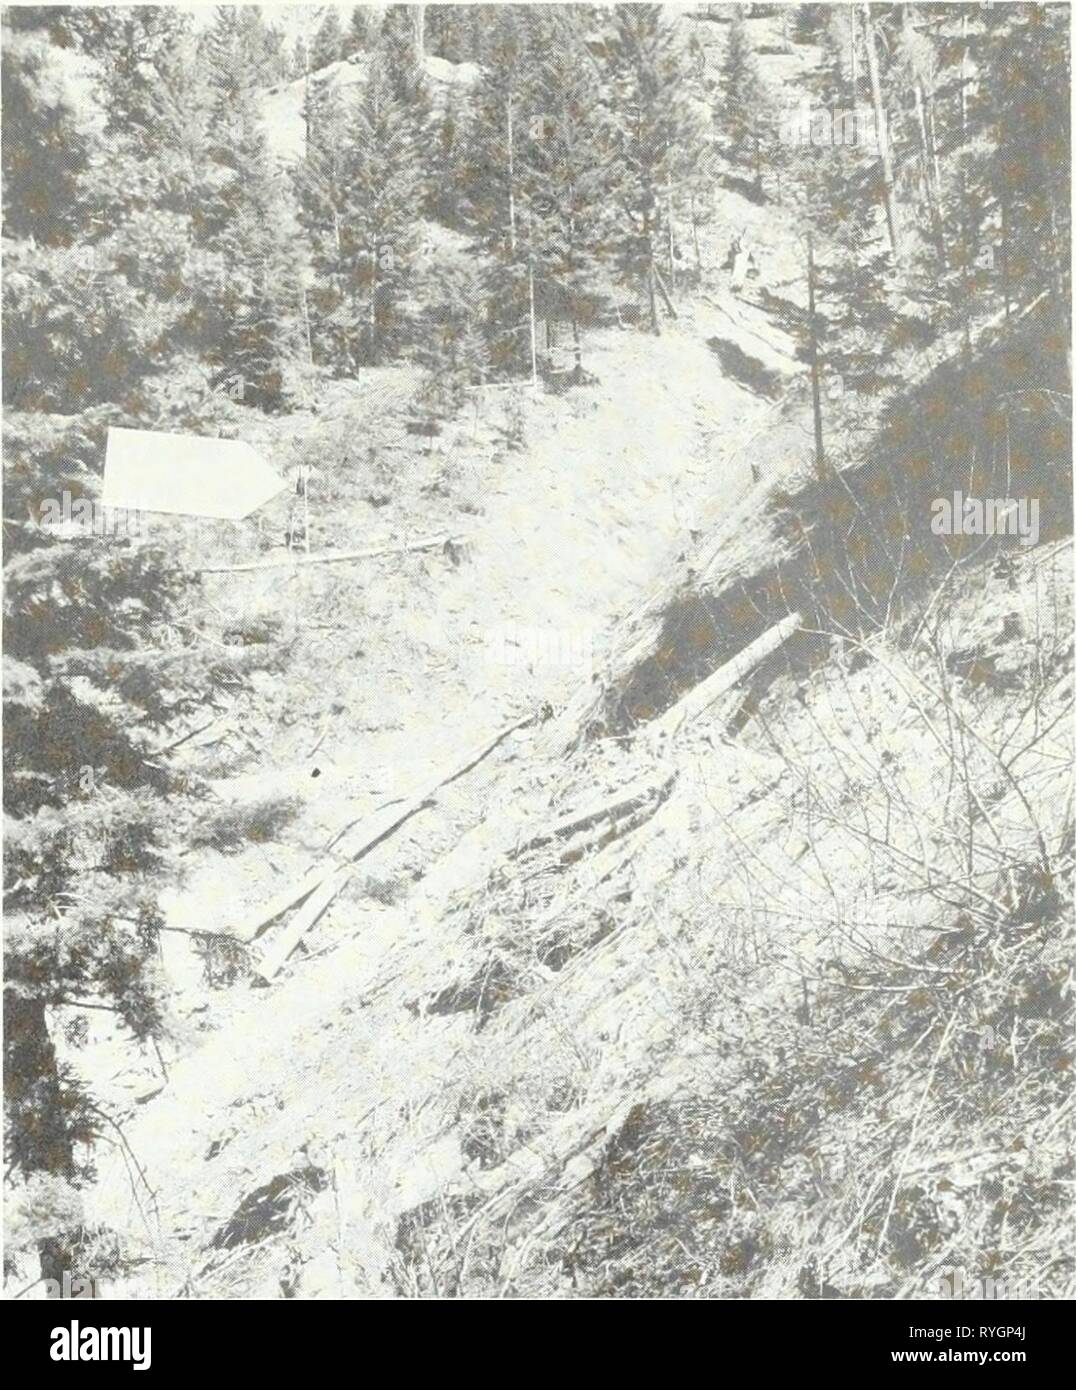 Effect of logging roads on sediment production rates in the Idaho Batholith  effectofloggingr123mega Year: 1972  Figure 5.—The debris avalanche scoured the bottom of Watershed 3 to bedrock. The slide obliterated the sedi- ment dam (formerly in the channel bottom) and splashed mud on top of the storage rain gage tower (see arrow).    water contents. Debris avalanches usually leave a discernible elongated scar to bedrock at the slide origin and often exhibit a characteristic downslope slide path. The lower jammer road in Watershed 3 was constructed through the old slide area without taking speci Stock Photo